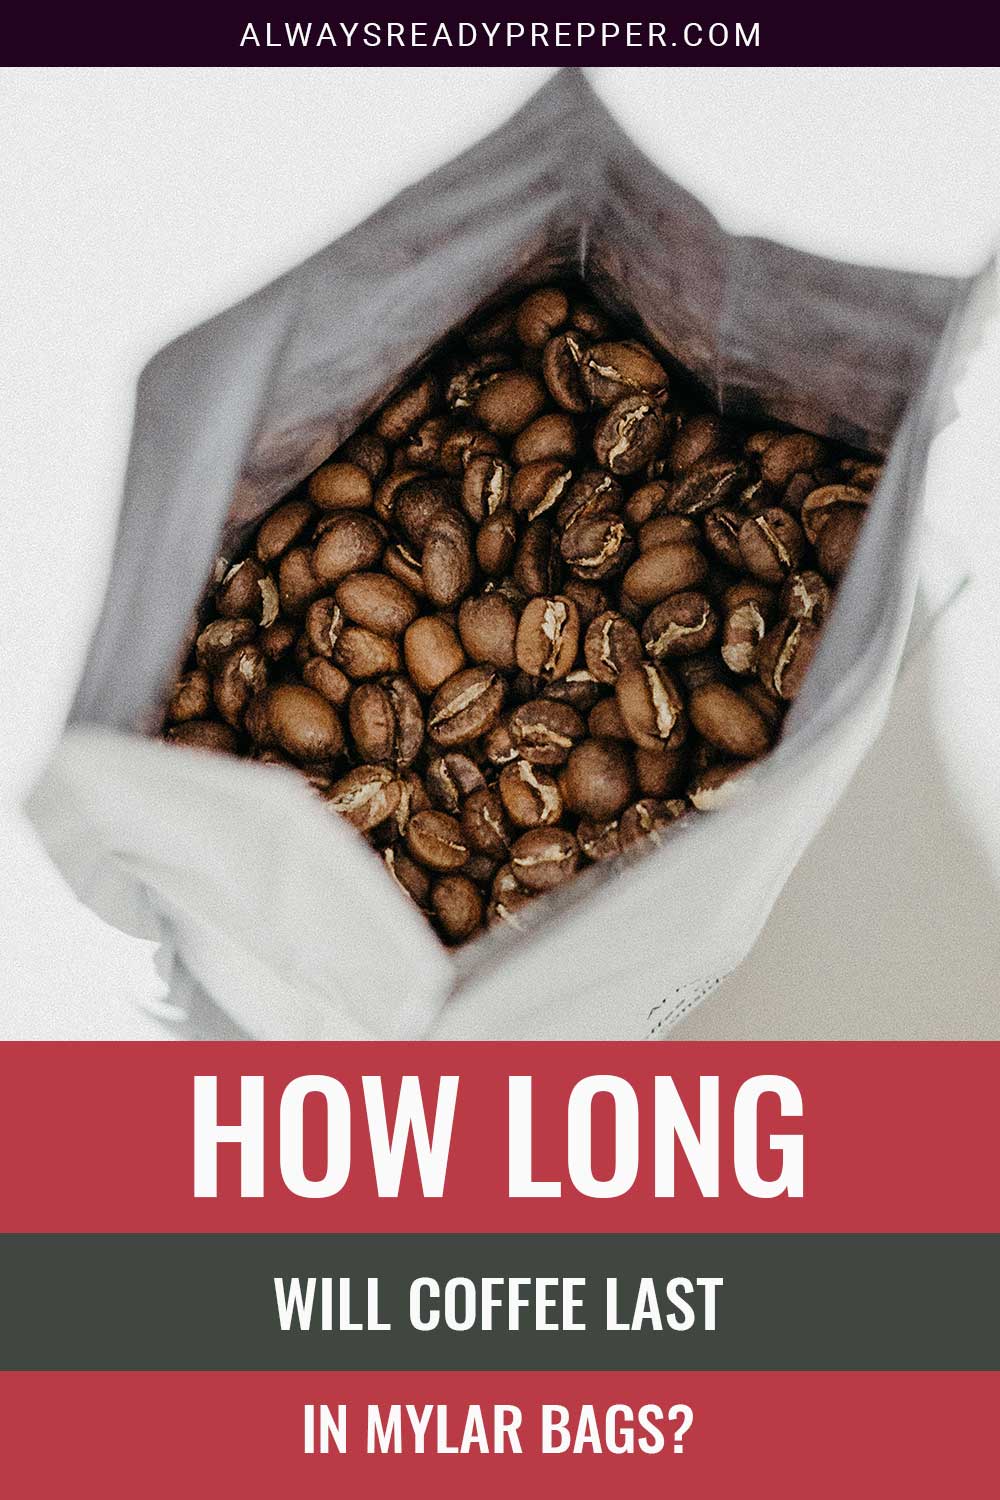 Coffee beans in a Mylar bag - How Long Will Coffee Last In Mylar Bags?